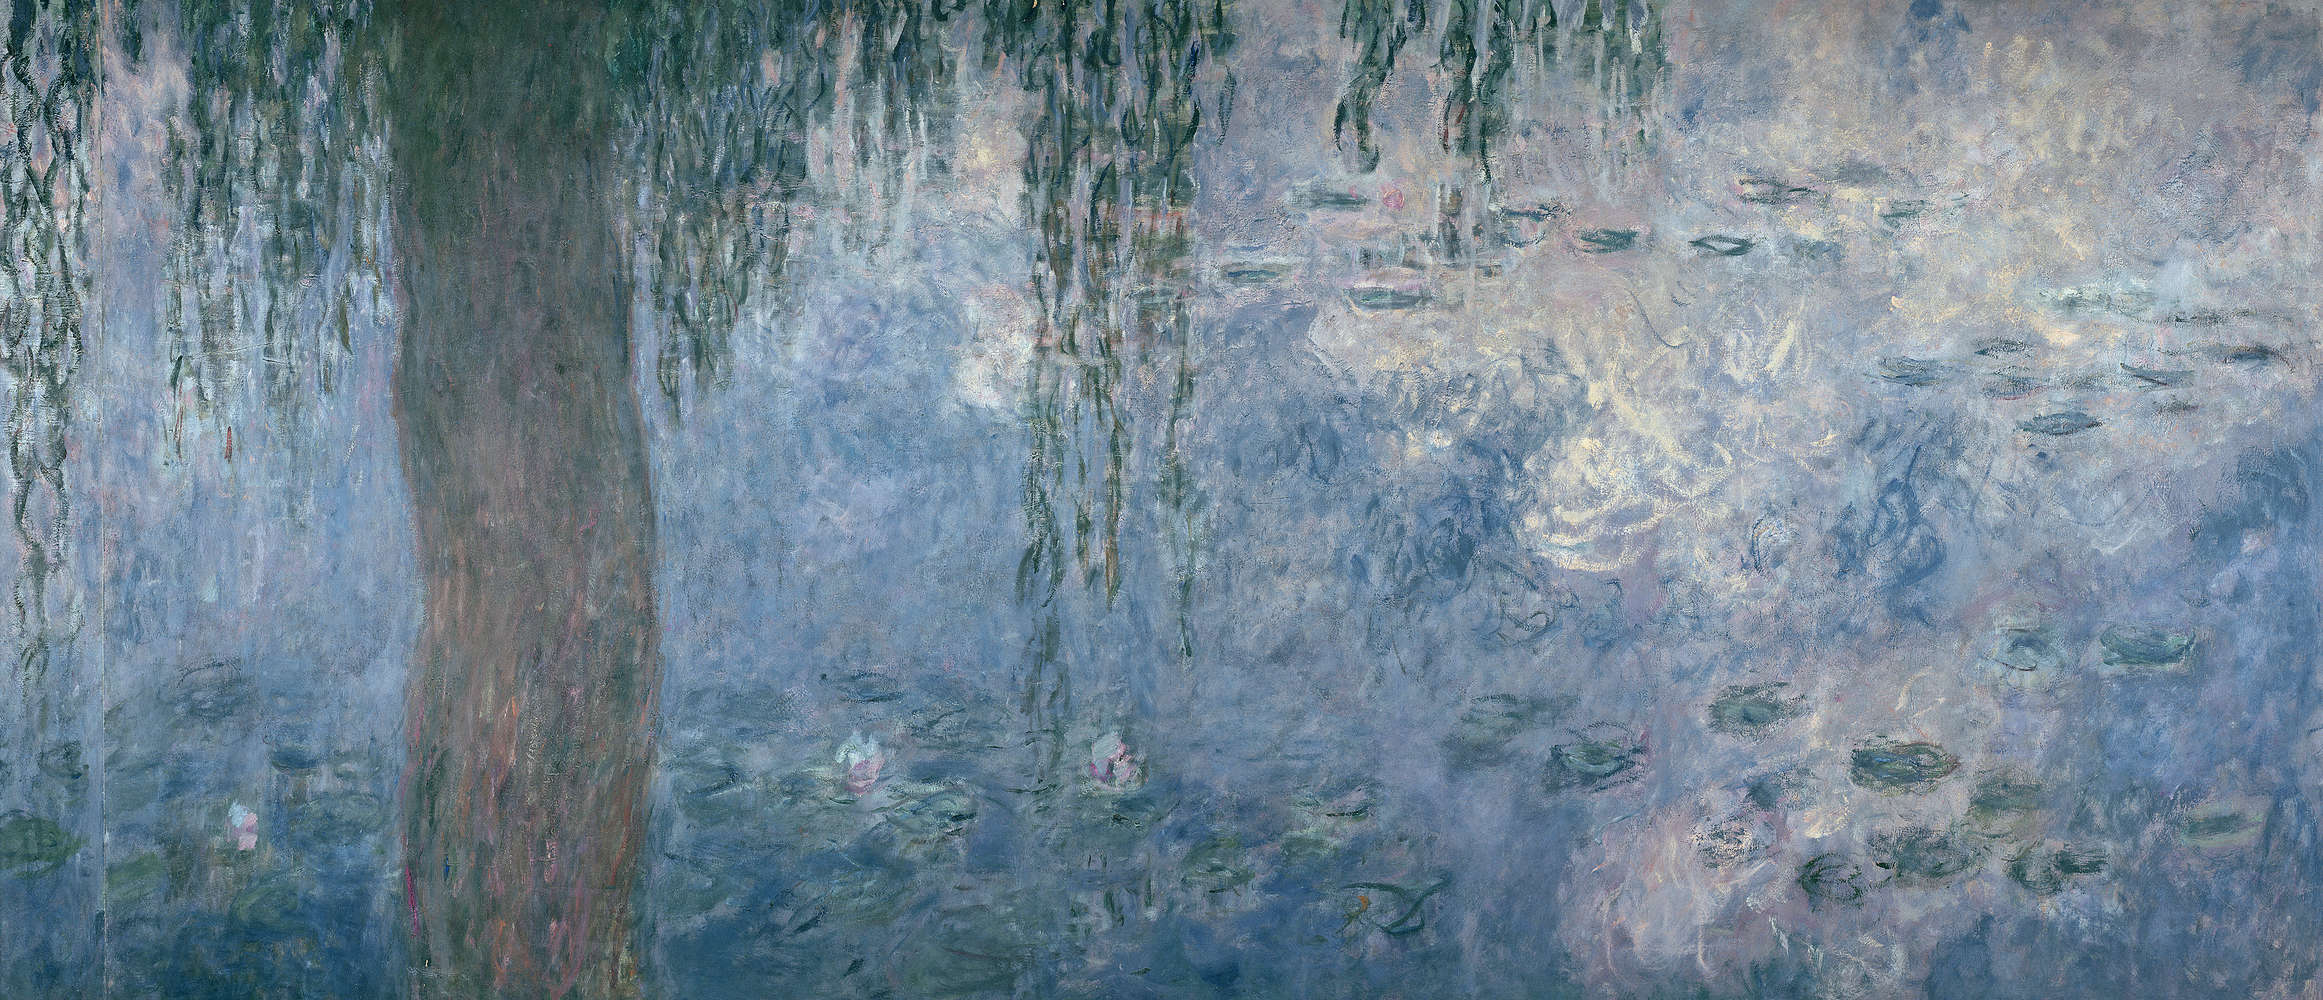             Photo wallpaper "Water lilies: morning with weeping willows" by Claude Monet
        